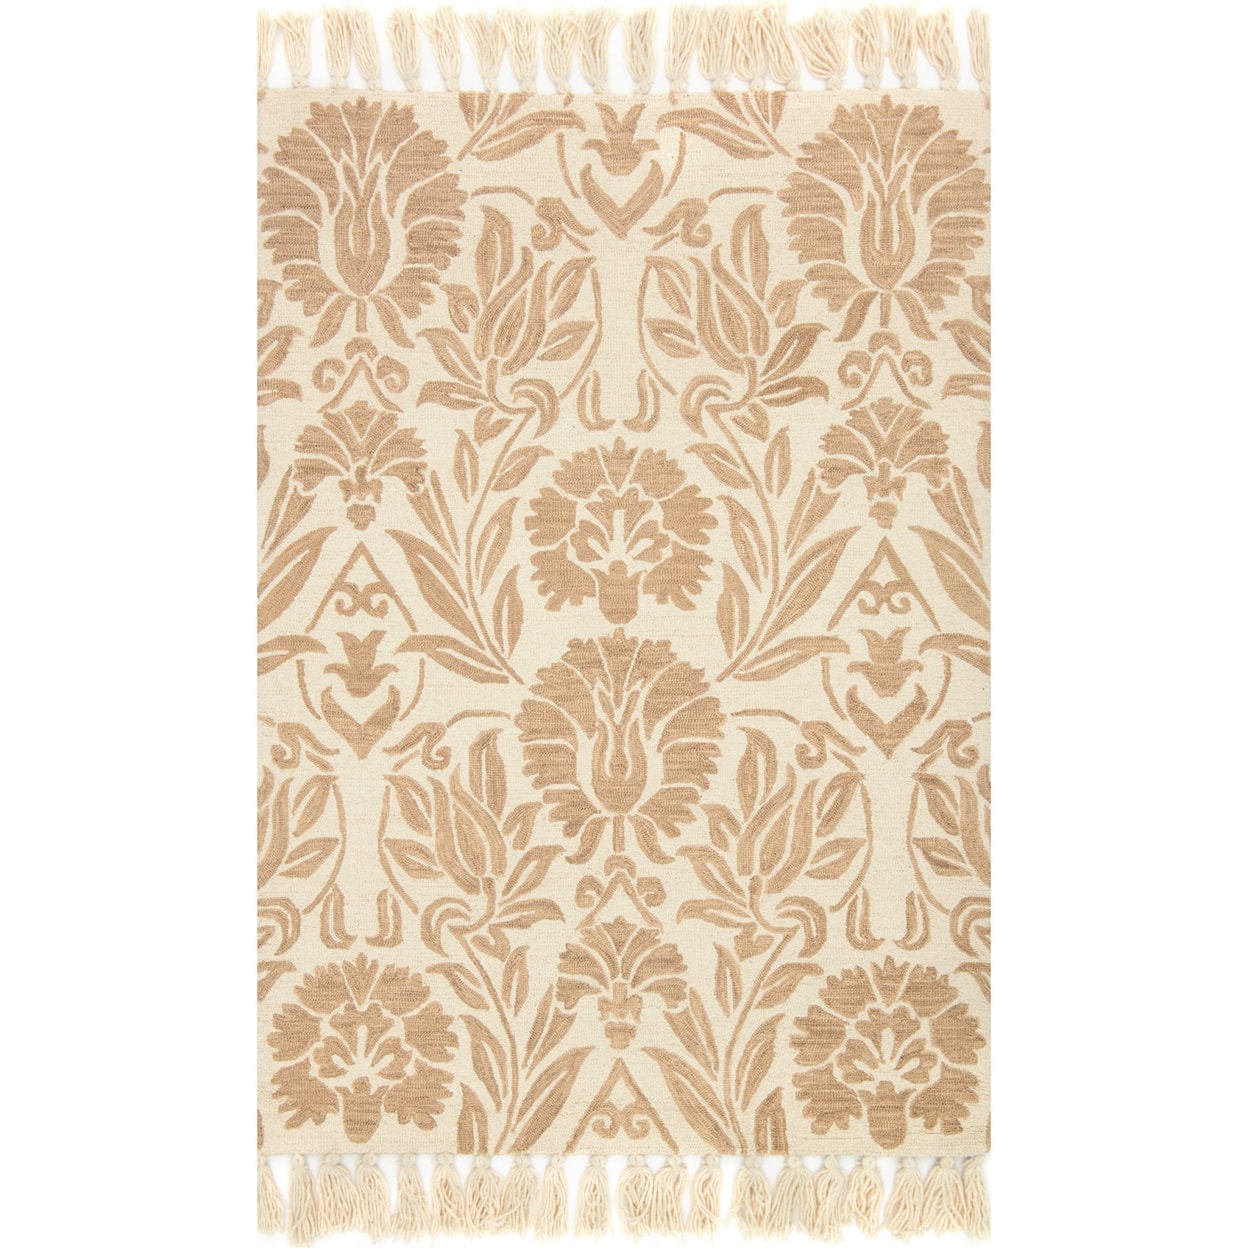 Magnolia Home by Joanna Gaines for Loloi Jozie Day 2' 6" X 7' 6" Runner Rug